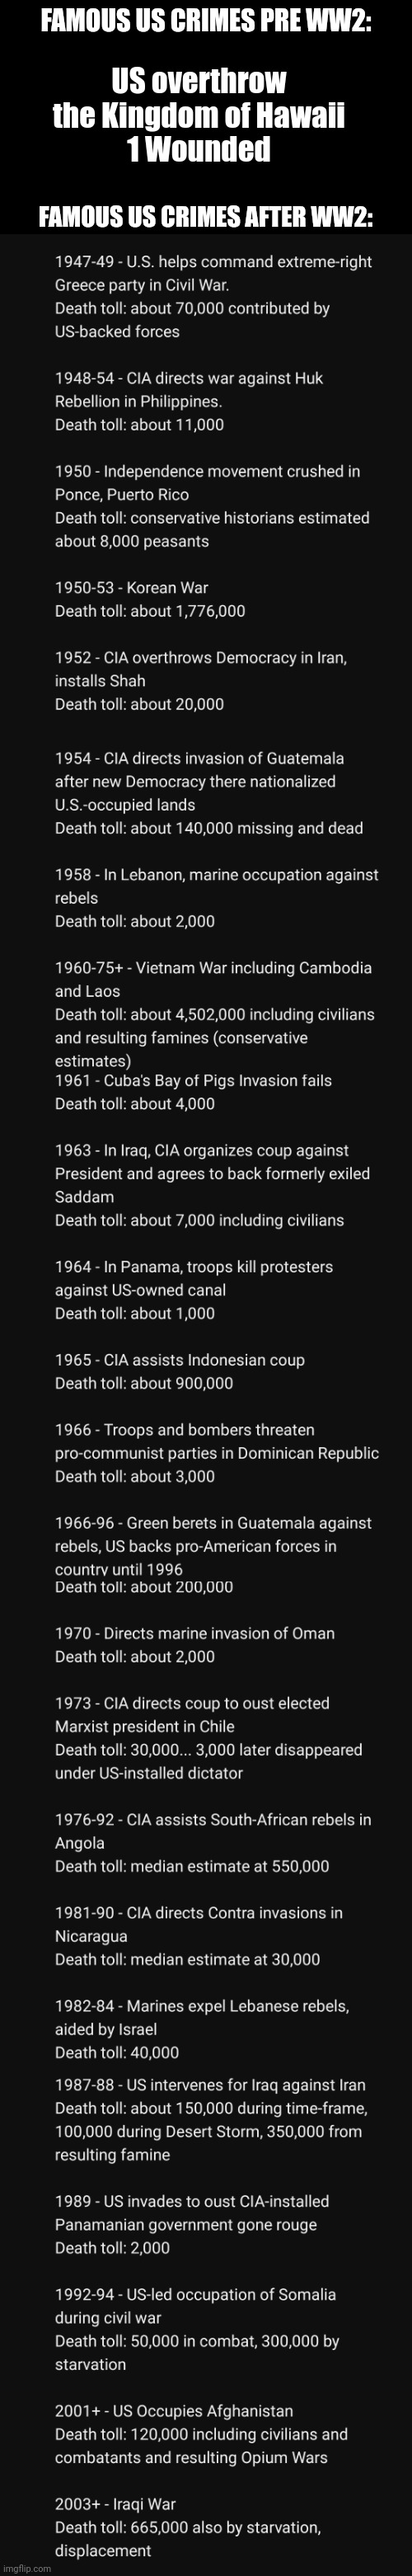 US overthrow the Kingdom of Hawaii
1 Wounded; FAMOUS US CRIMES PRE WW2:; FAMOUS US CRIMES AFTER WW2: | image tagged in memes,murica,gop | made w/ Imgflip meme maker